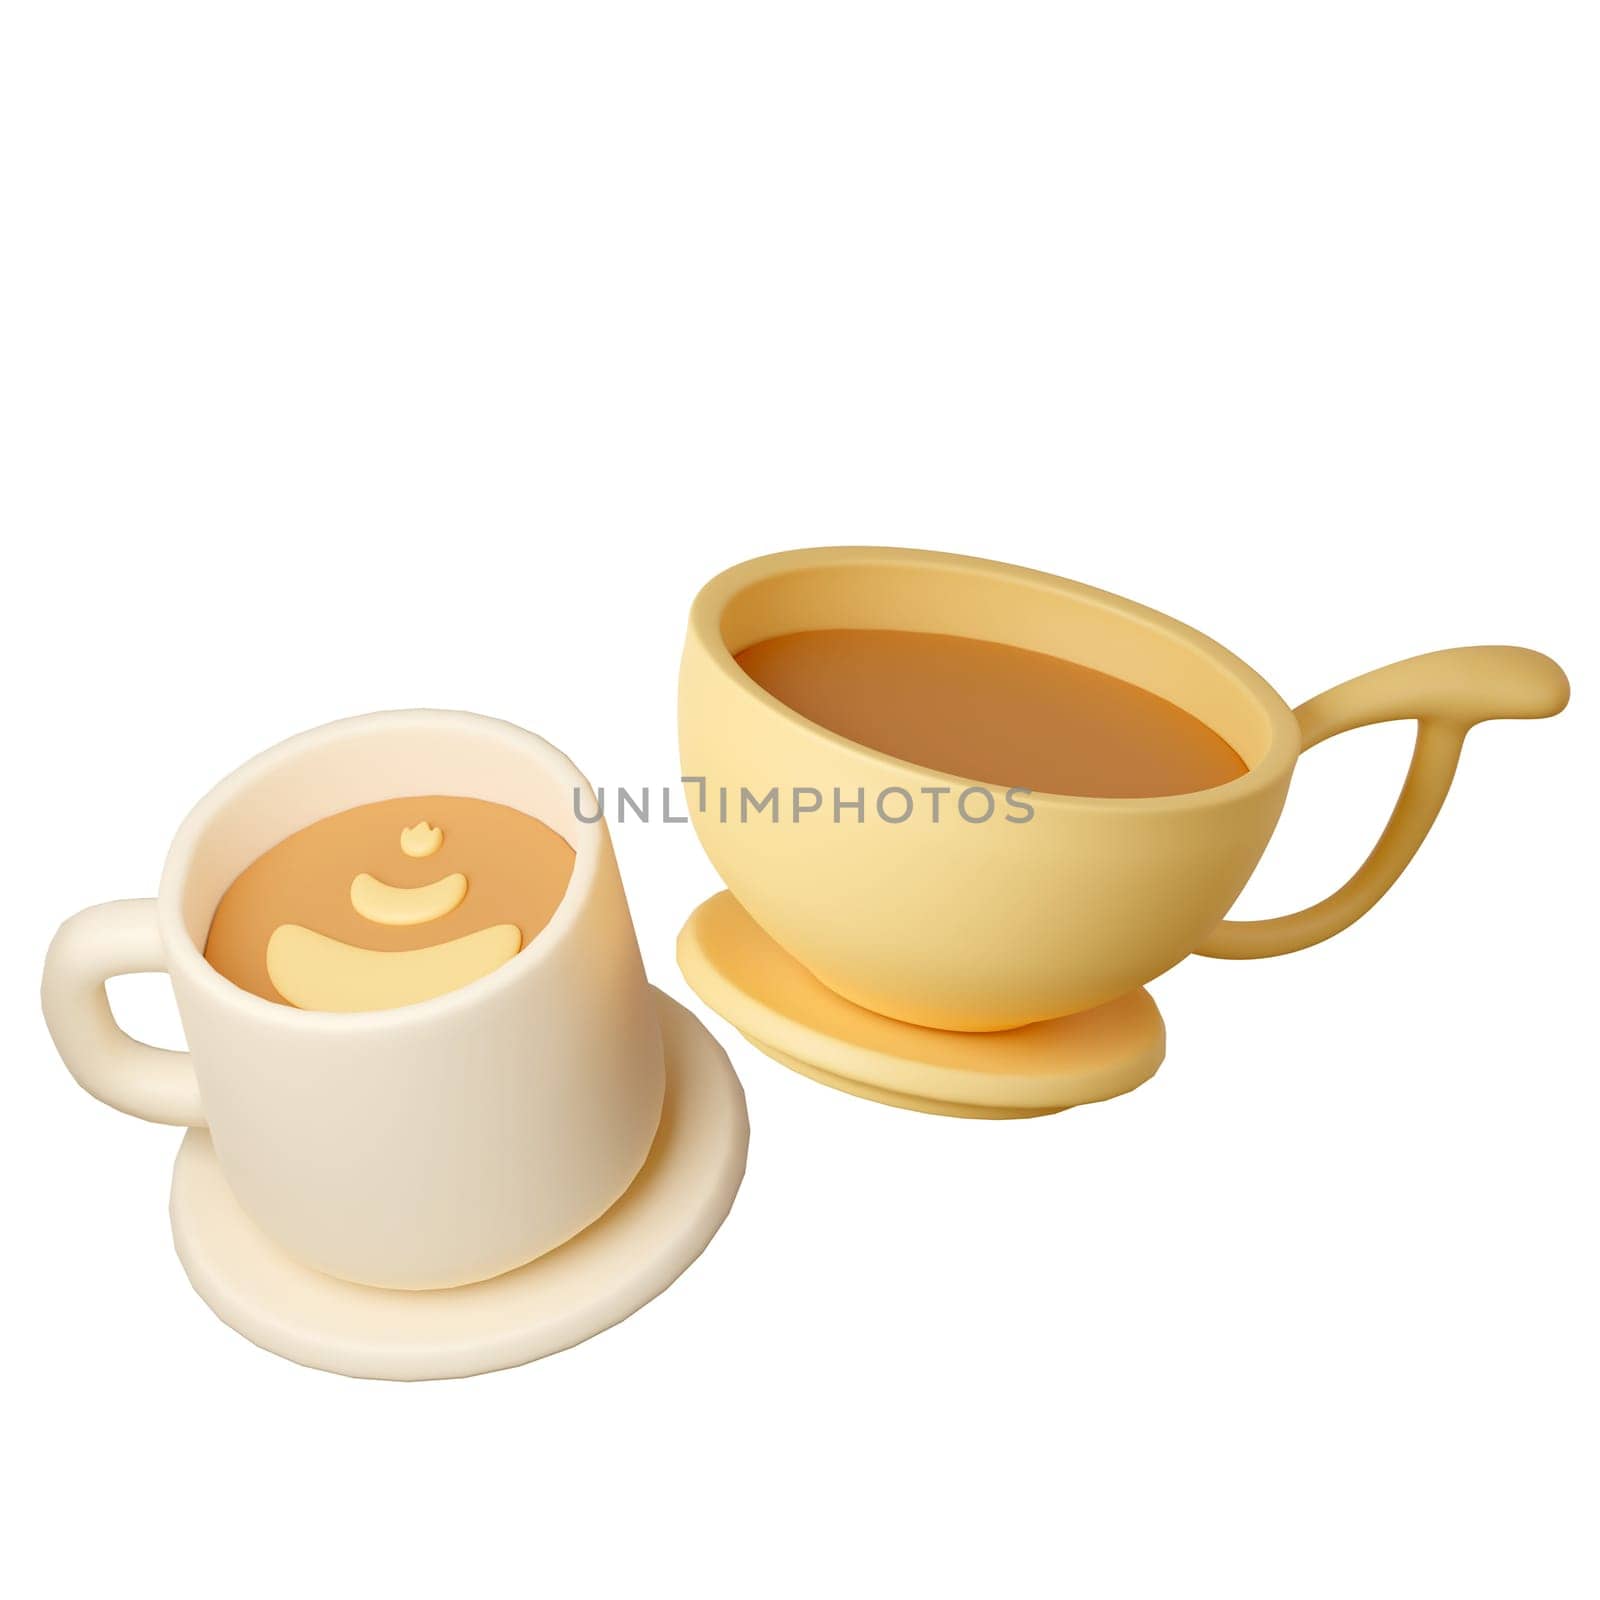 a set of coffee Cartoon Style Isolated on a White Background. 3d illustration.